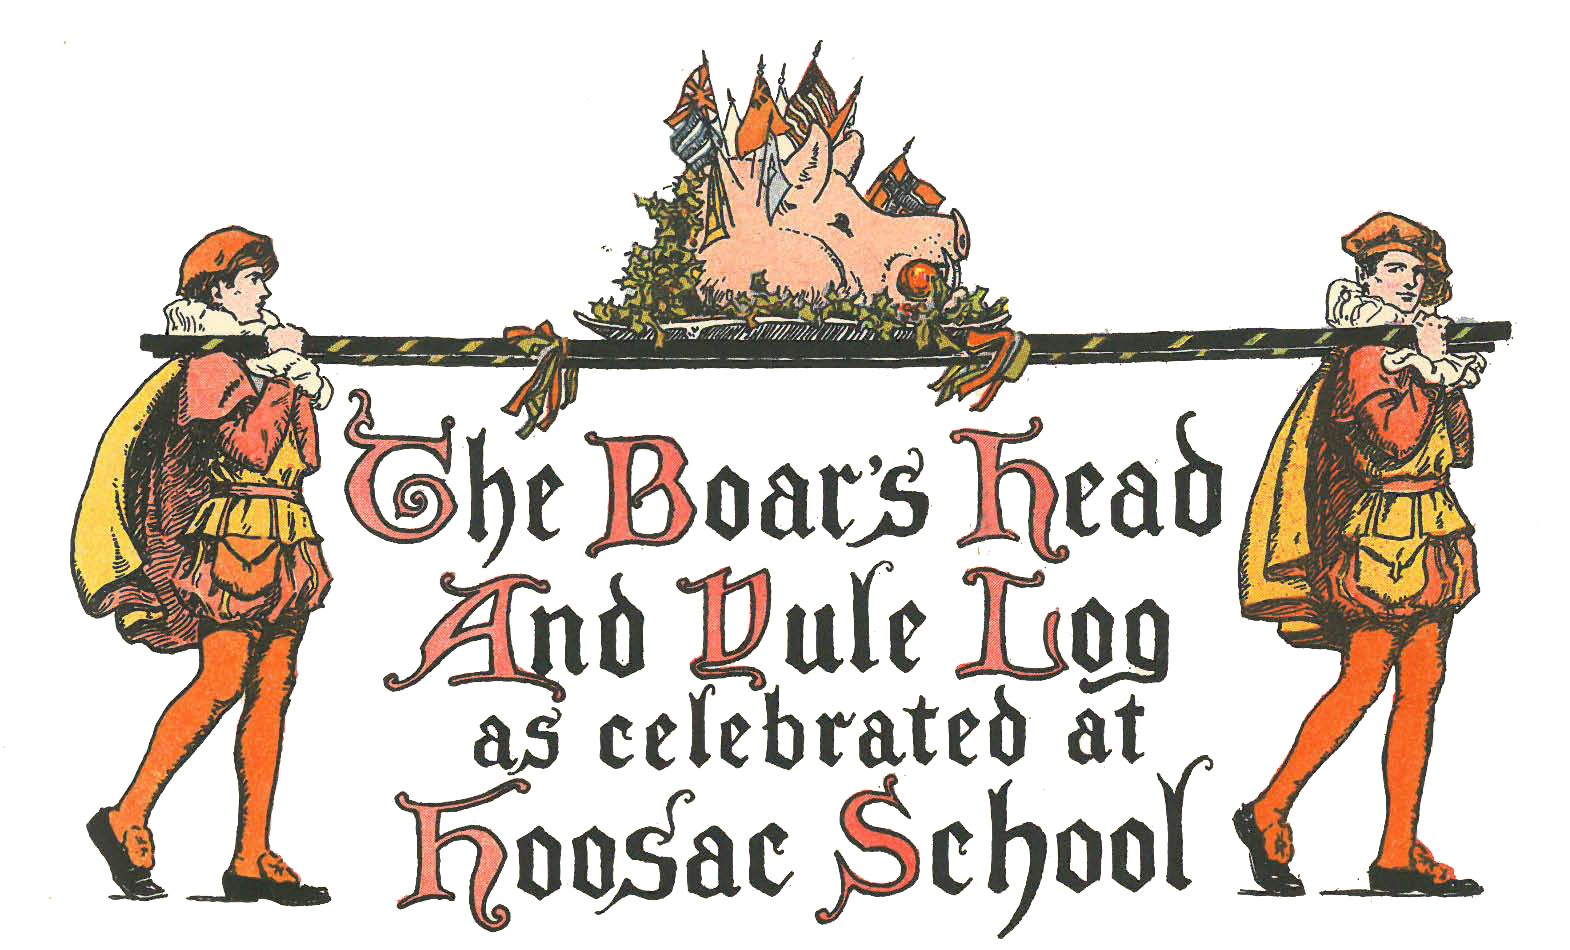 Drawn logo for the Boar's Head and Yule Log as celebrated at Hoosac School